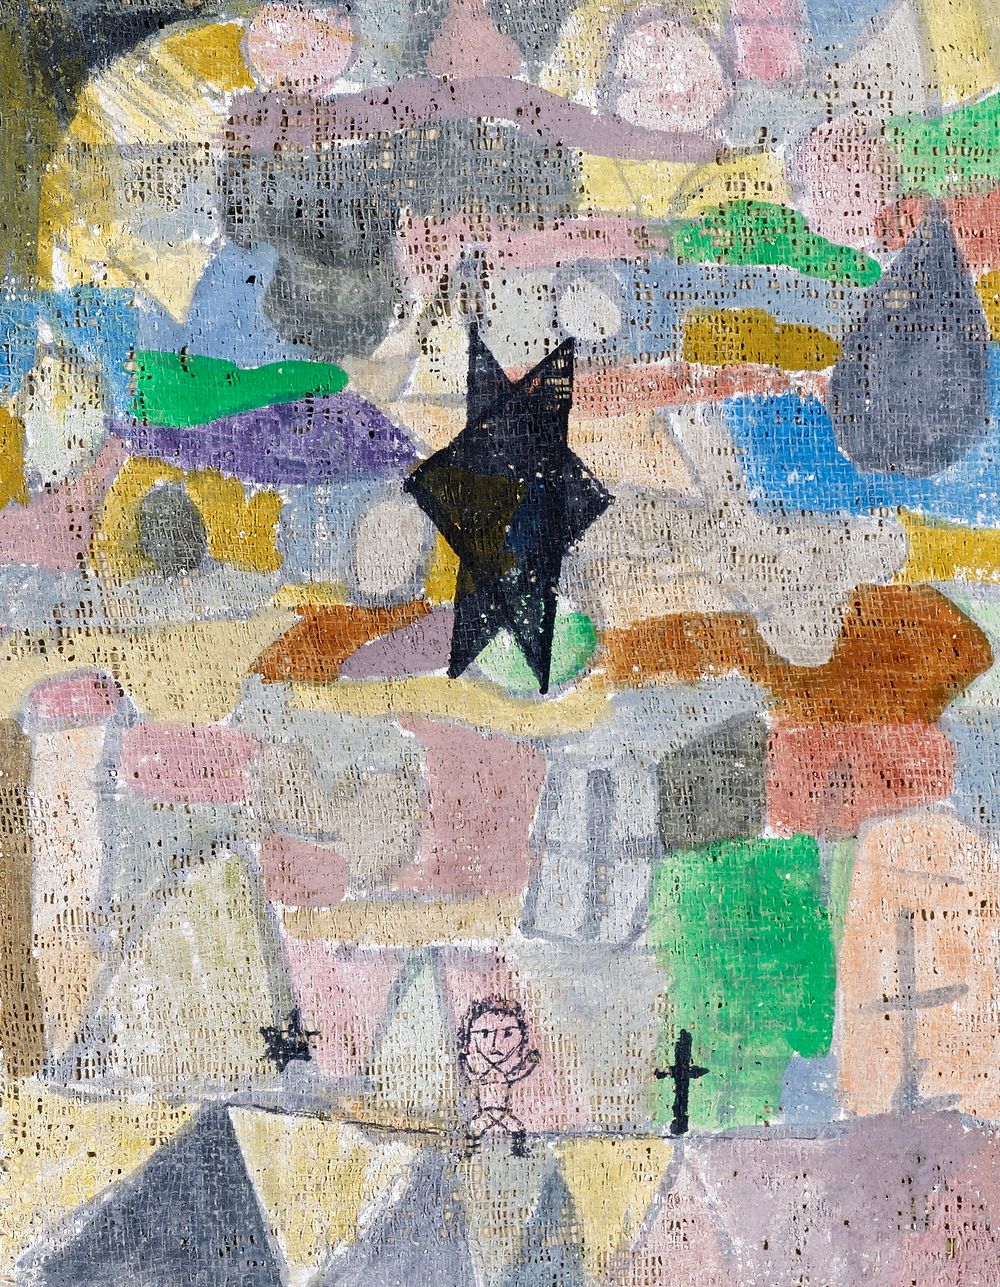 Under a black star (1918) painting in high resolution by Paul Klee. Original from the Kunstmuseum Basel Museum. Digitally…